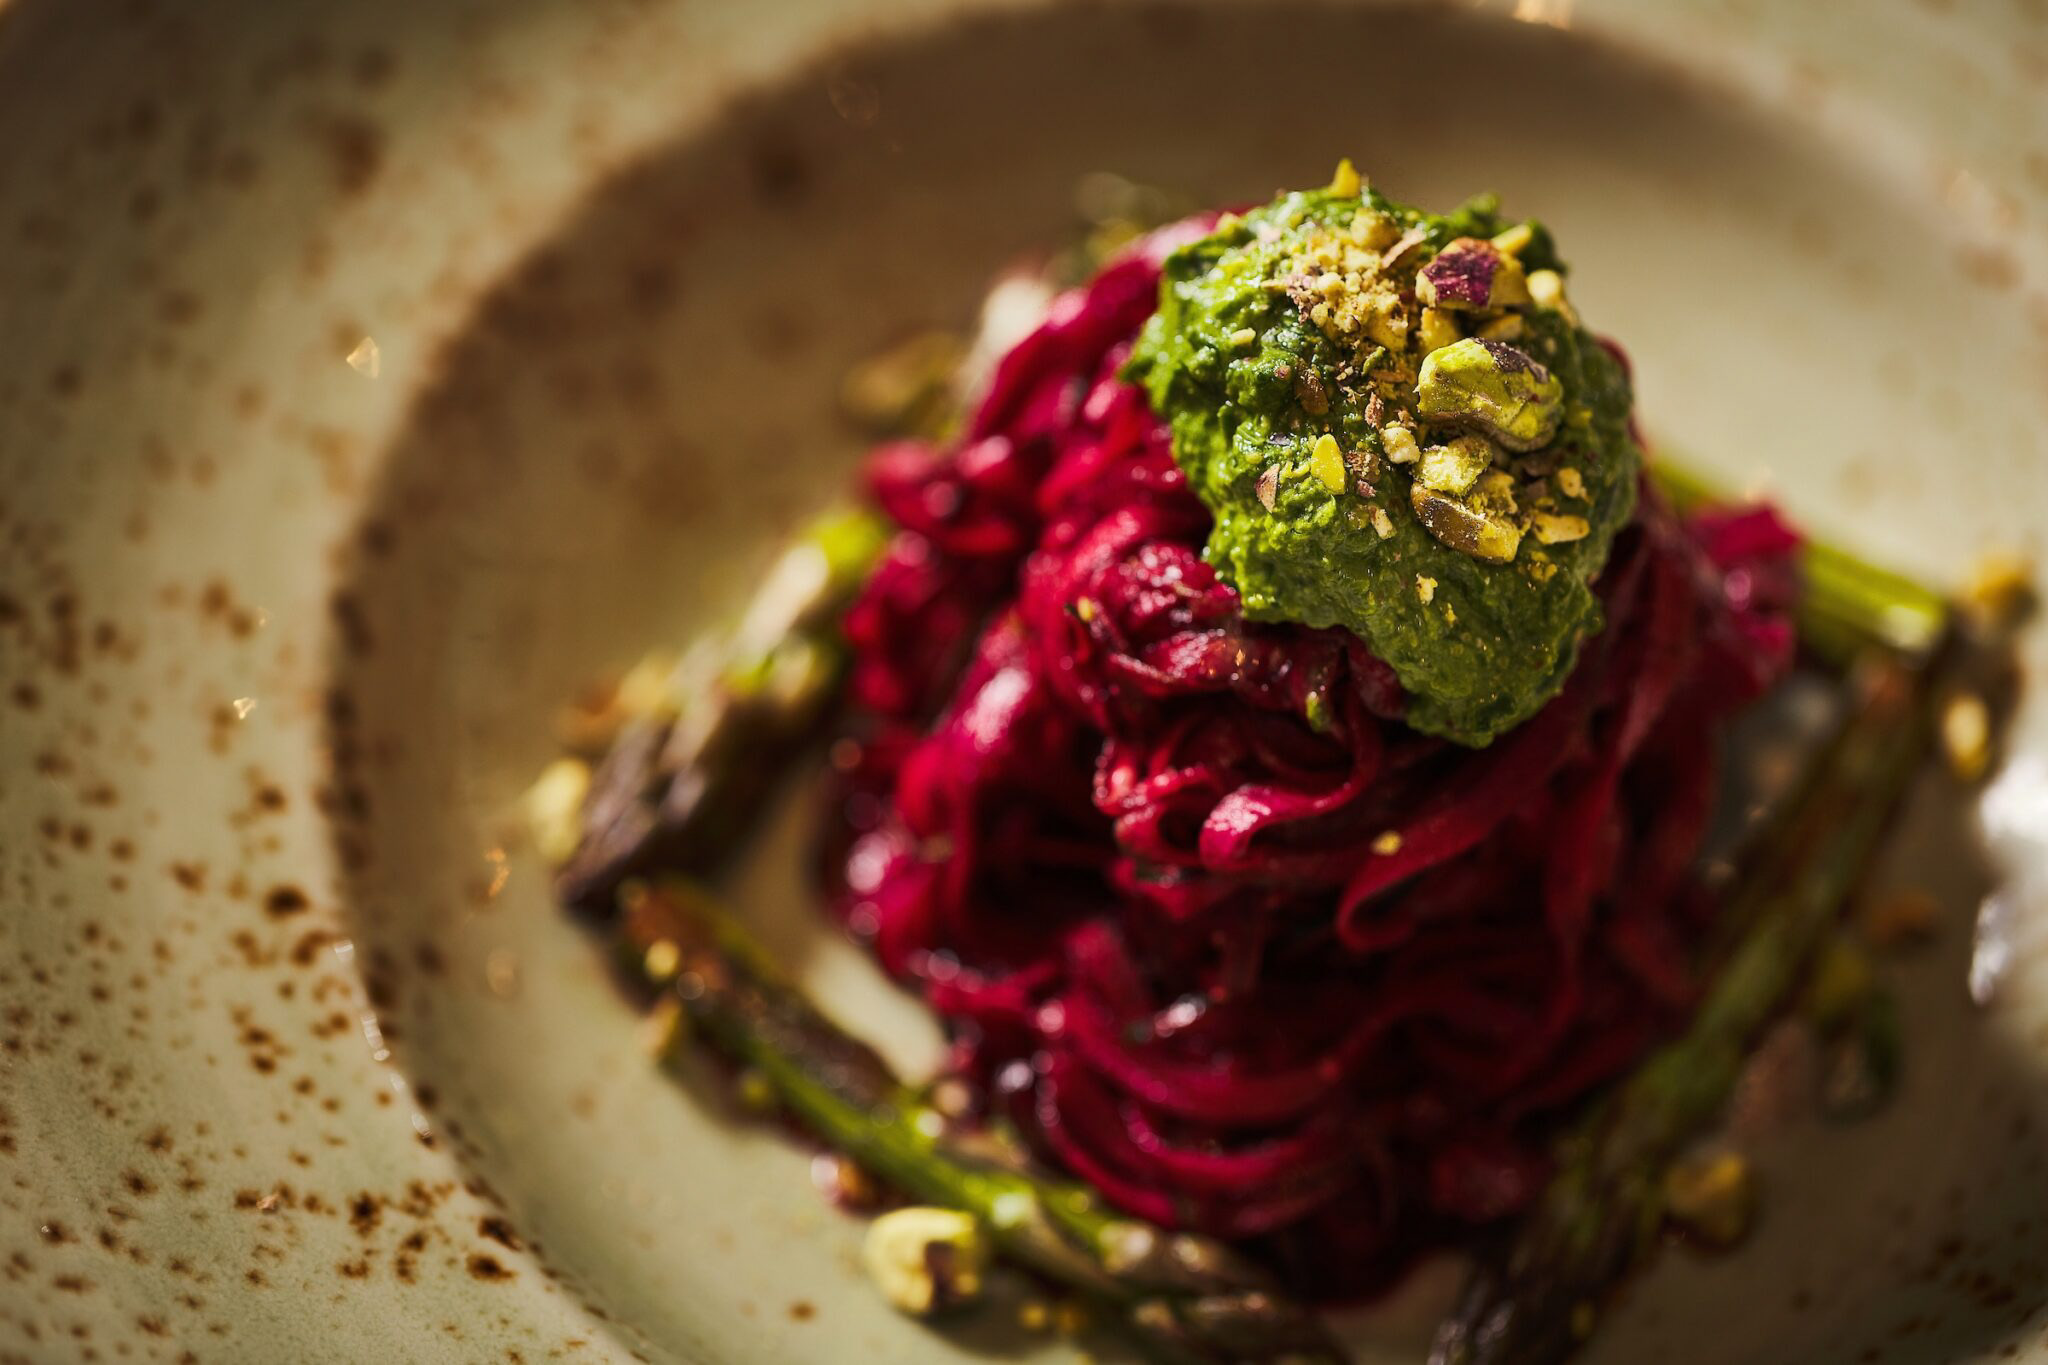 Beetroot spaghetti with vegan pesto on a rustic plate.